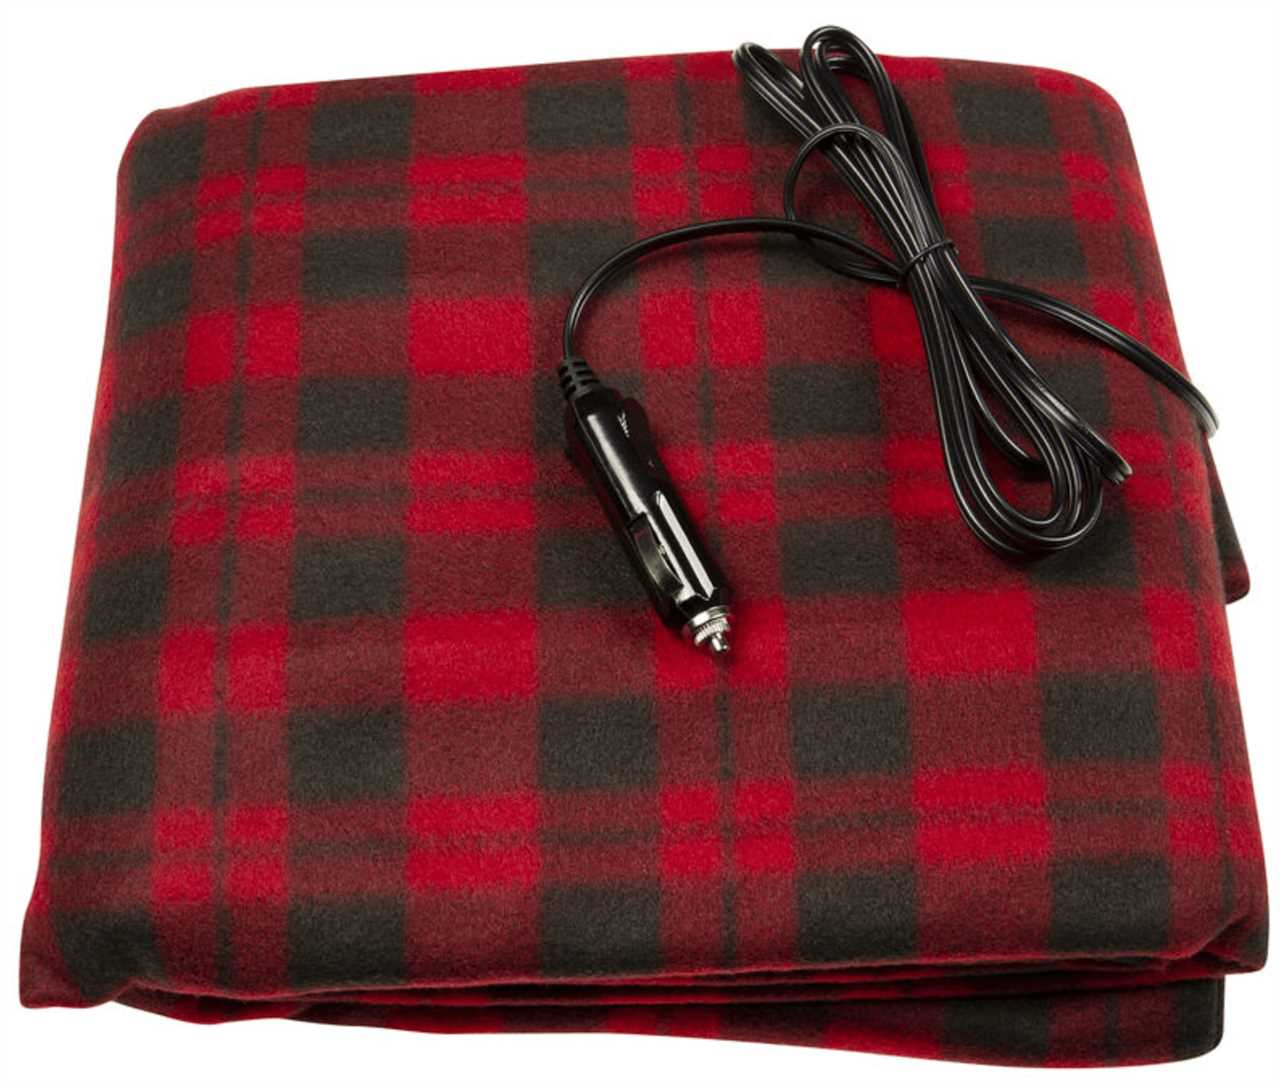 heated-blanket-how-to-make-rv-bed-more-comfortable-11-2022 